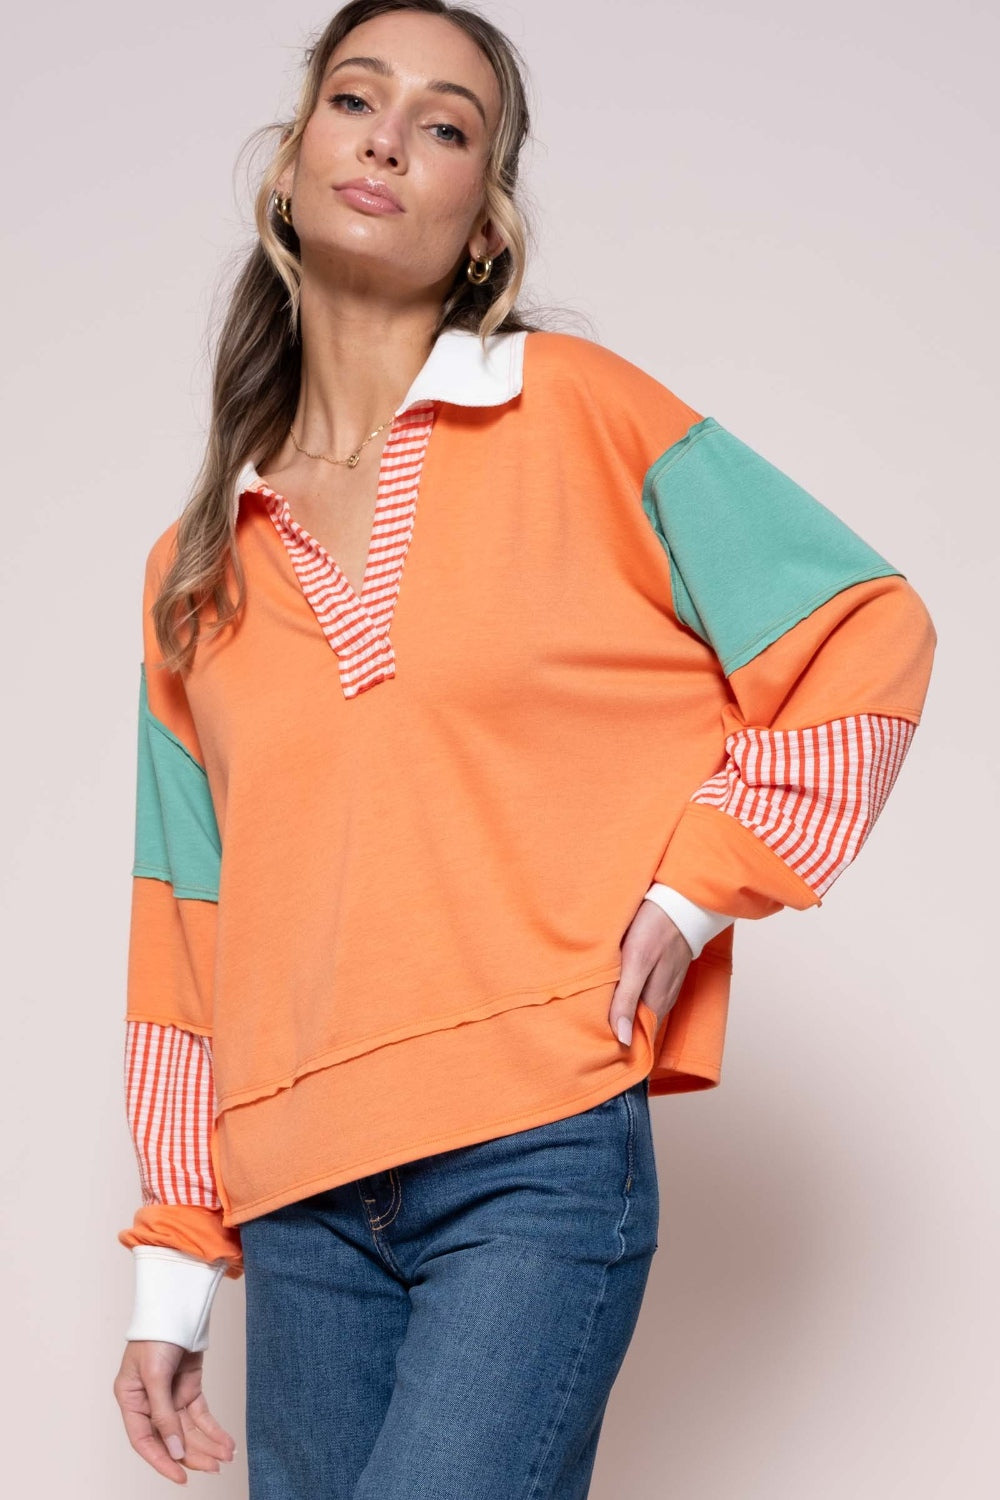 Hazel Blues® |  Hailey & Co Color Block Top with Striped Panel